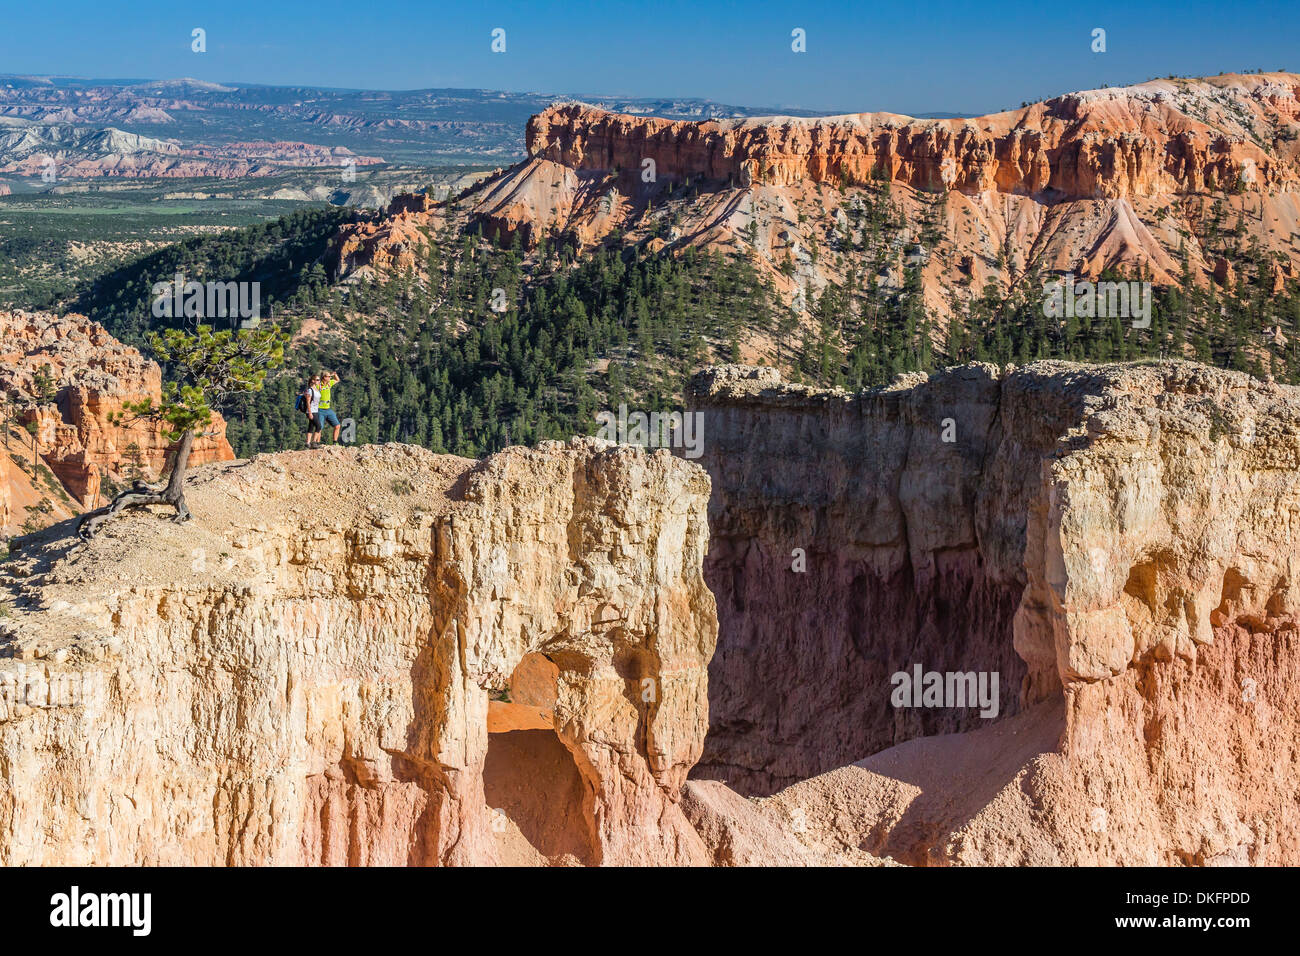 Hikers on arch rock formation in Bryce Canyon Amphitheater, Bryce Canyon National Park, Utah, USA Stock Photo